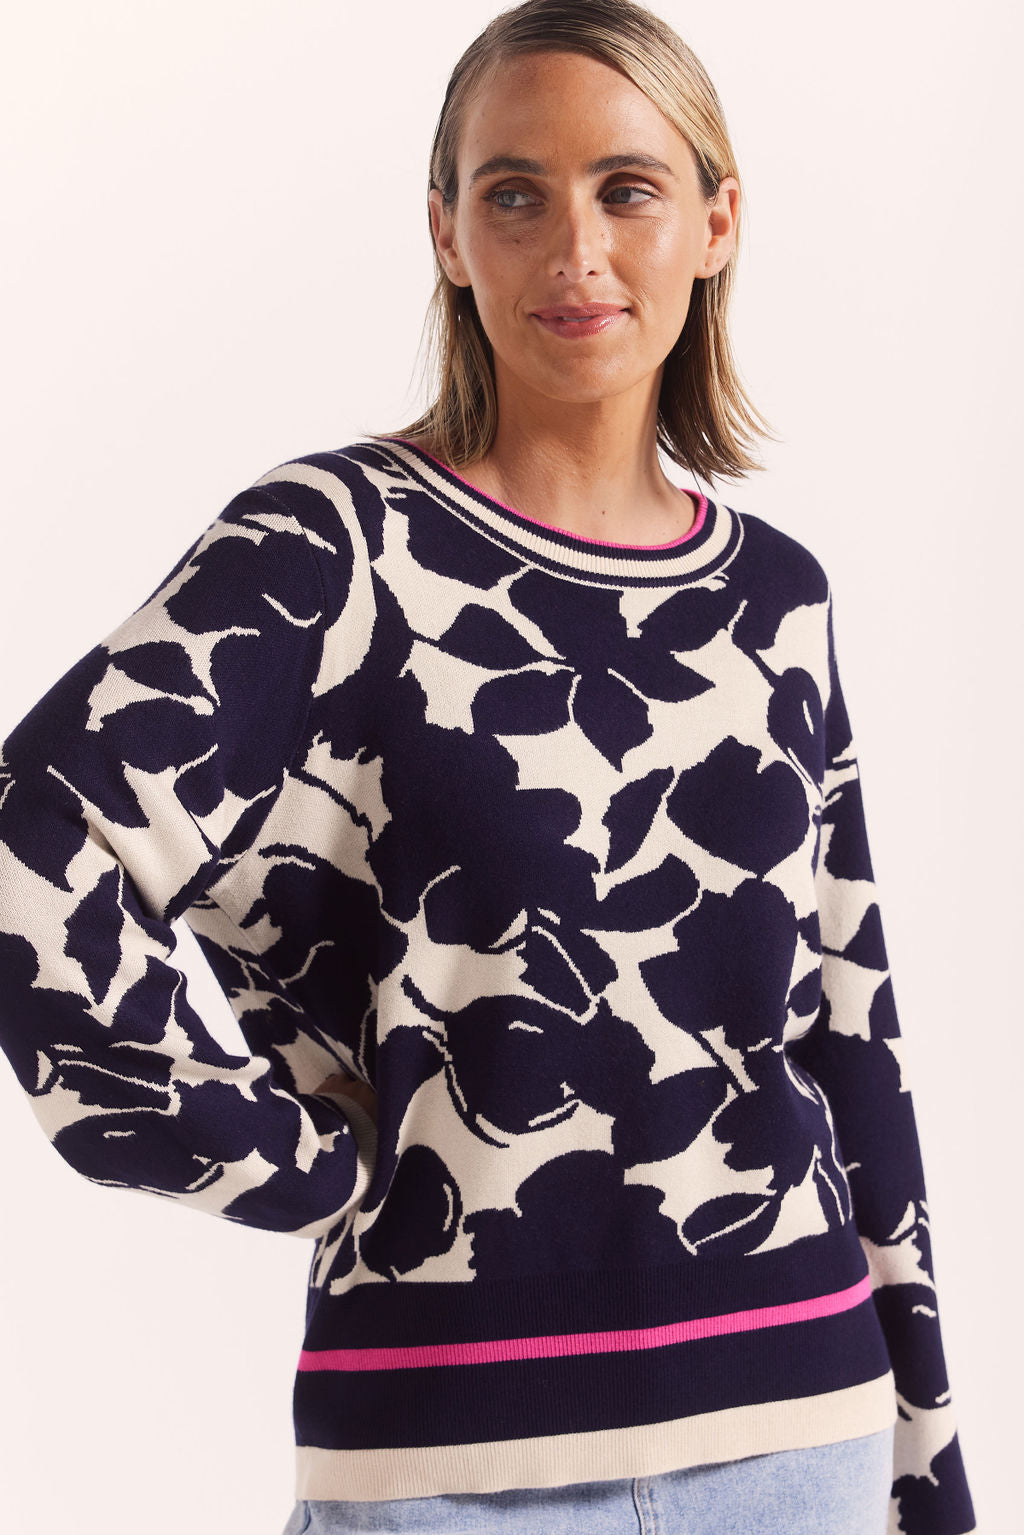 Wear Colour Floral Bomb Sweater - Navy/Fuchsia